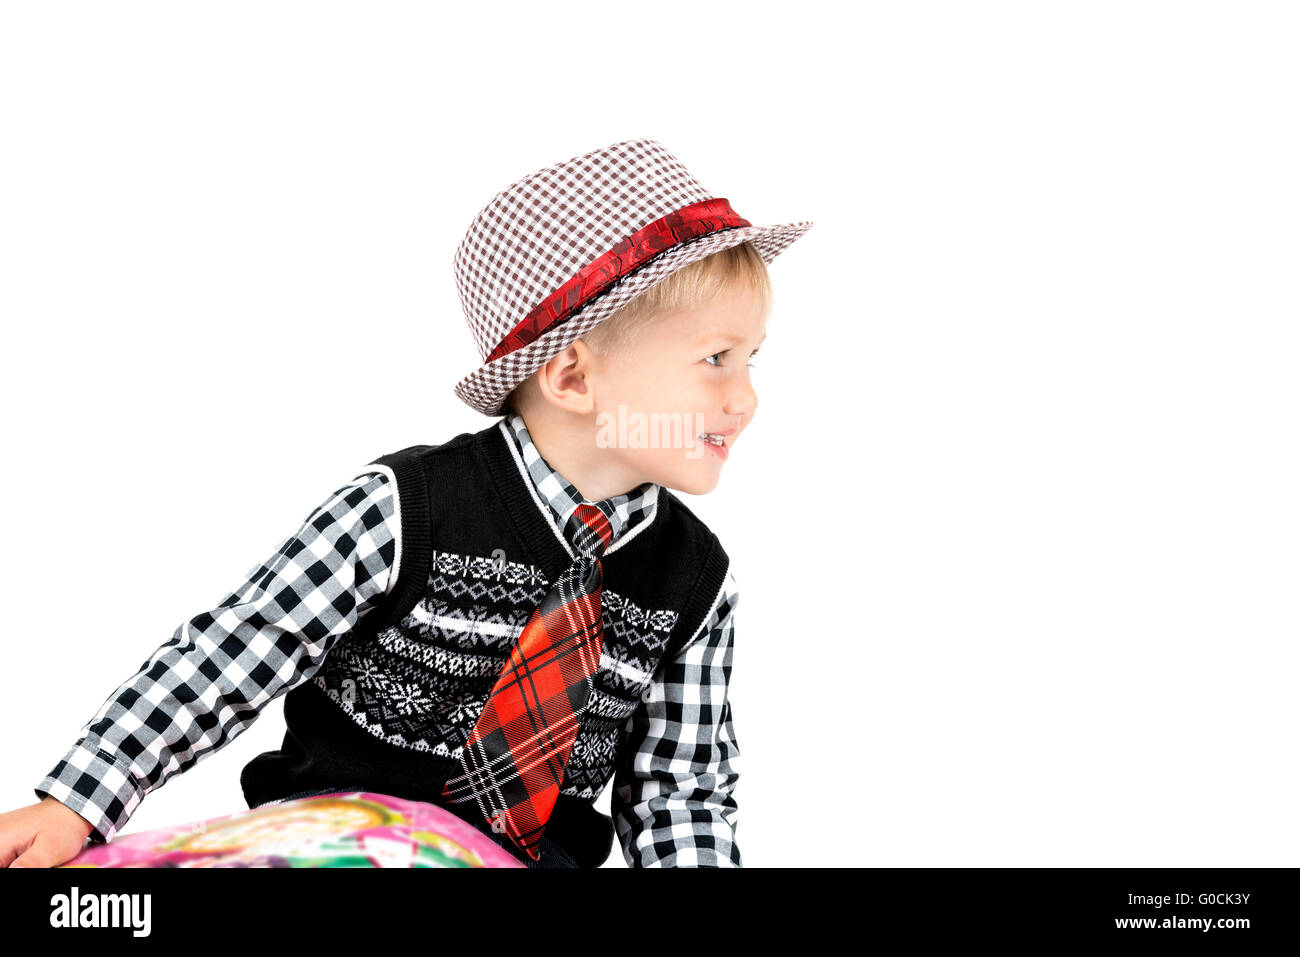 Smiling happy boy in hat shot in the studio on a white background Stock Photo